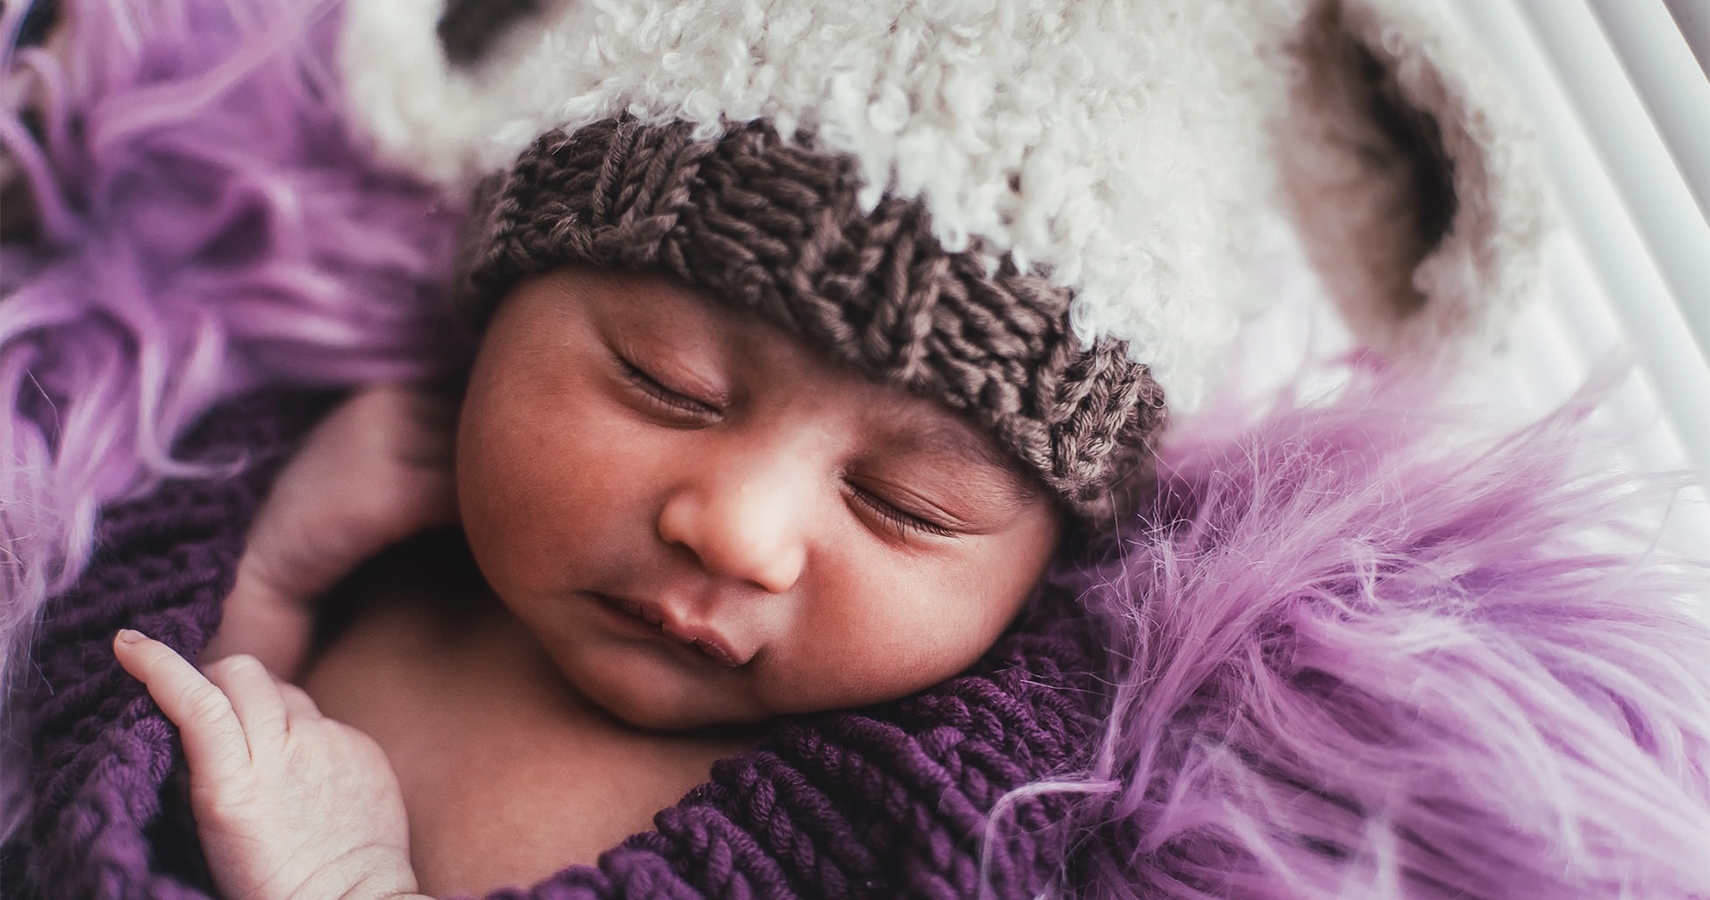 What To Expect At Your Newborn’s Photoshoot &amp; How To Prepare